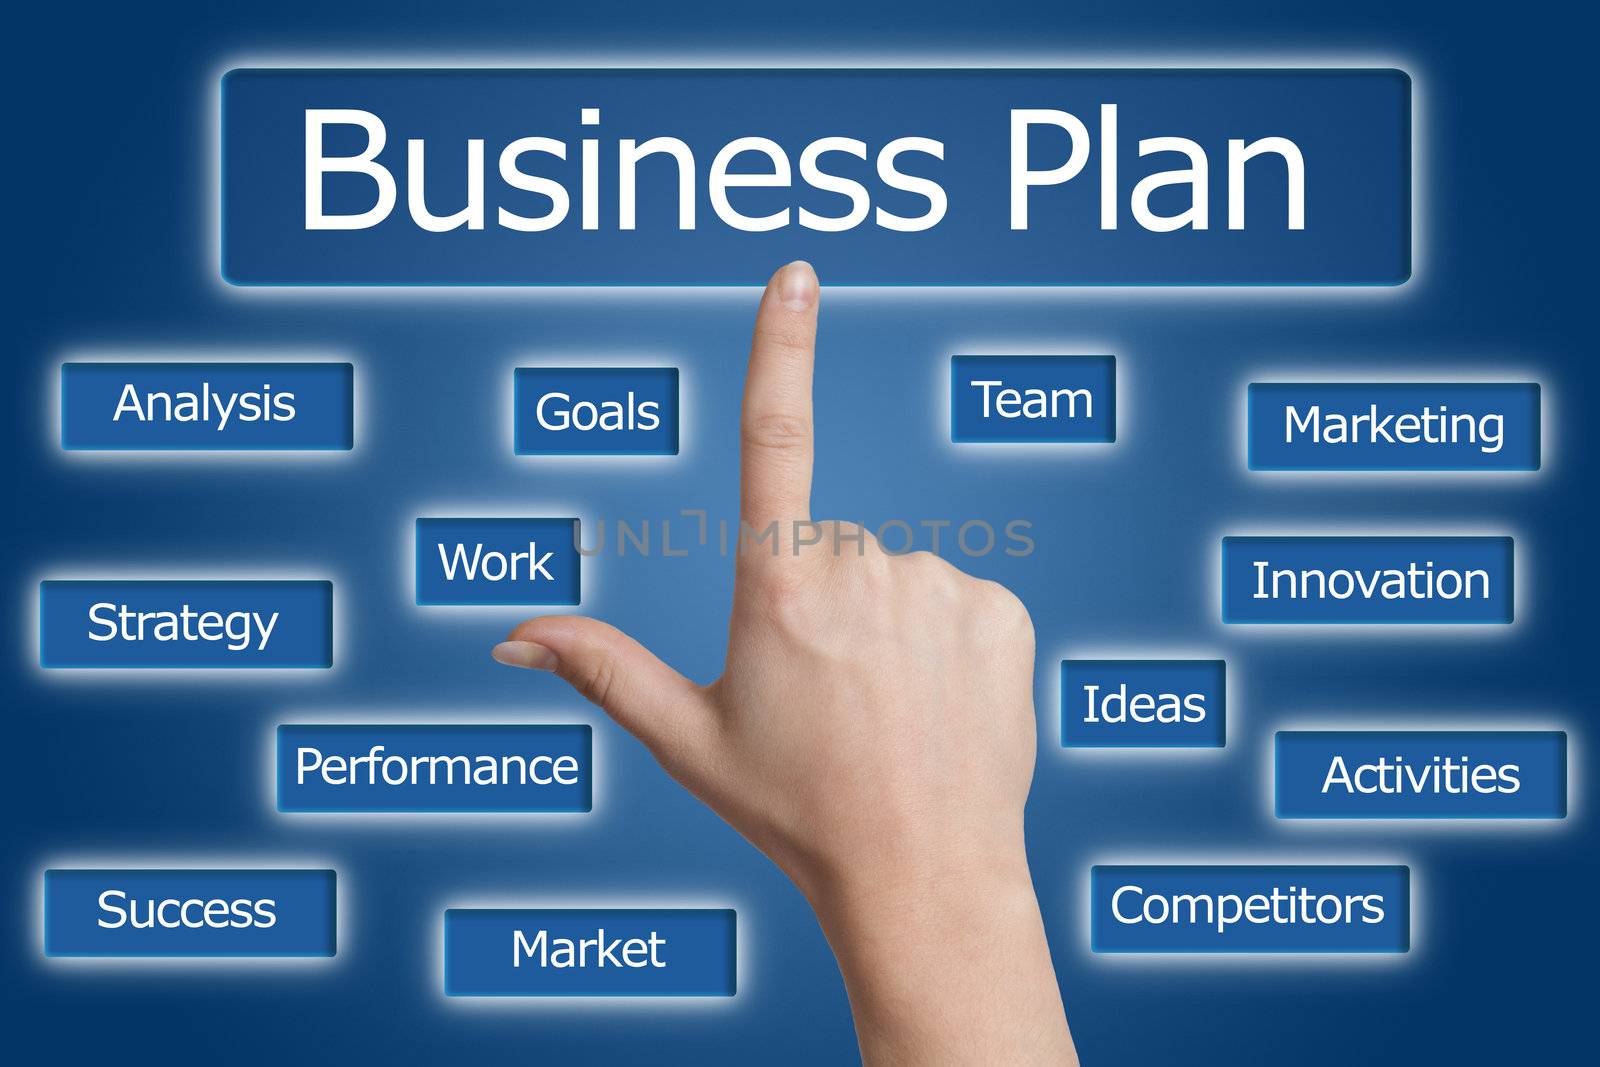 woman hand pressing business plan icon on blue background